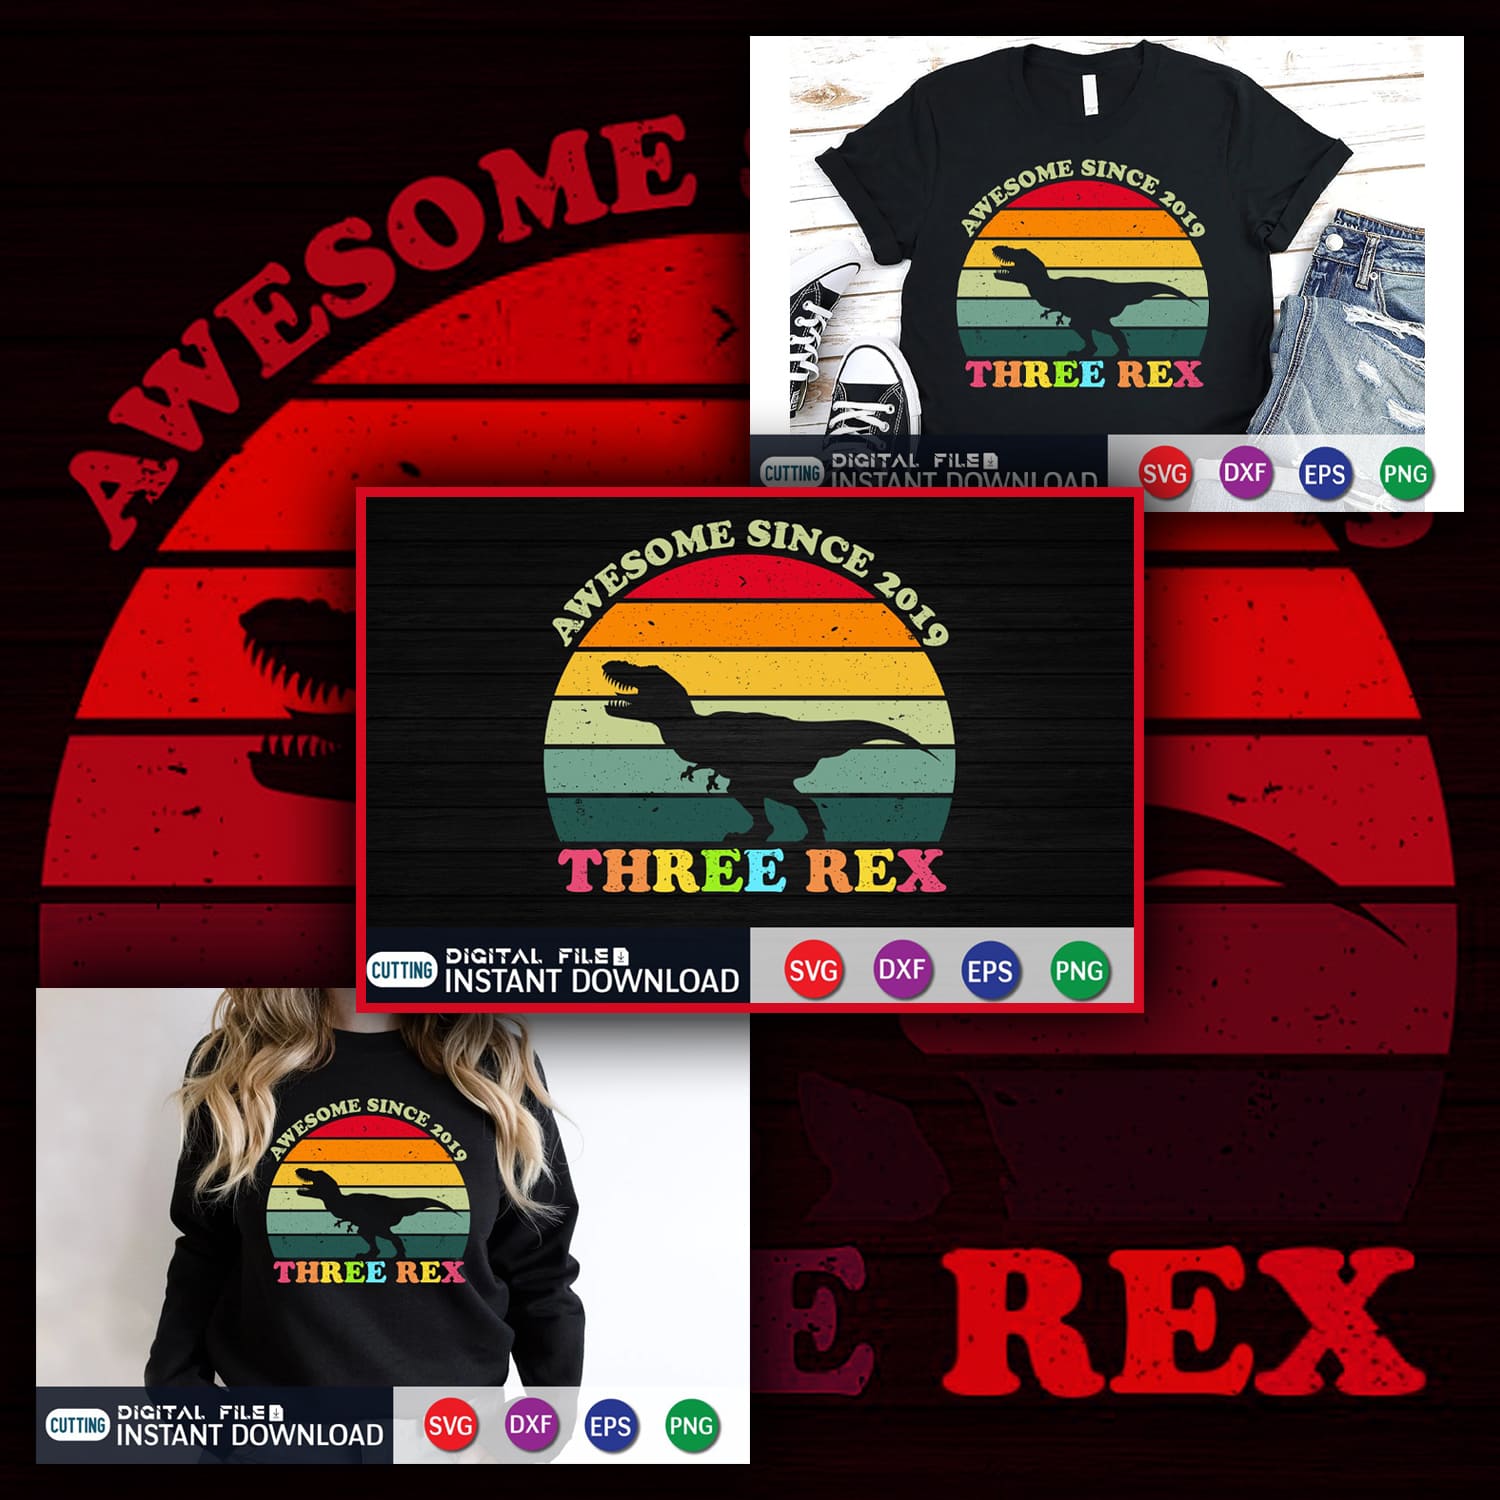 Awesome Since 2019 Three Rex SVG cover.